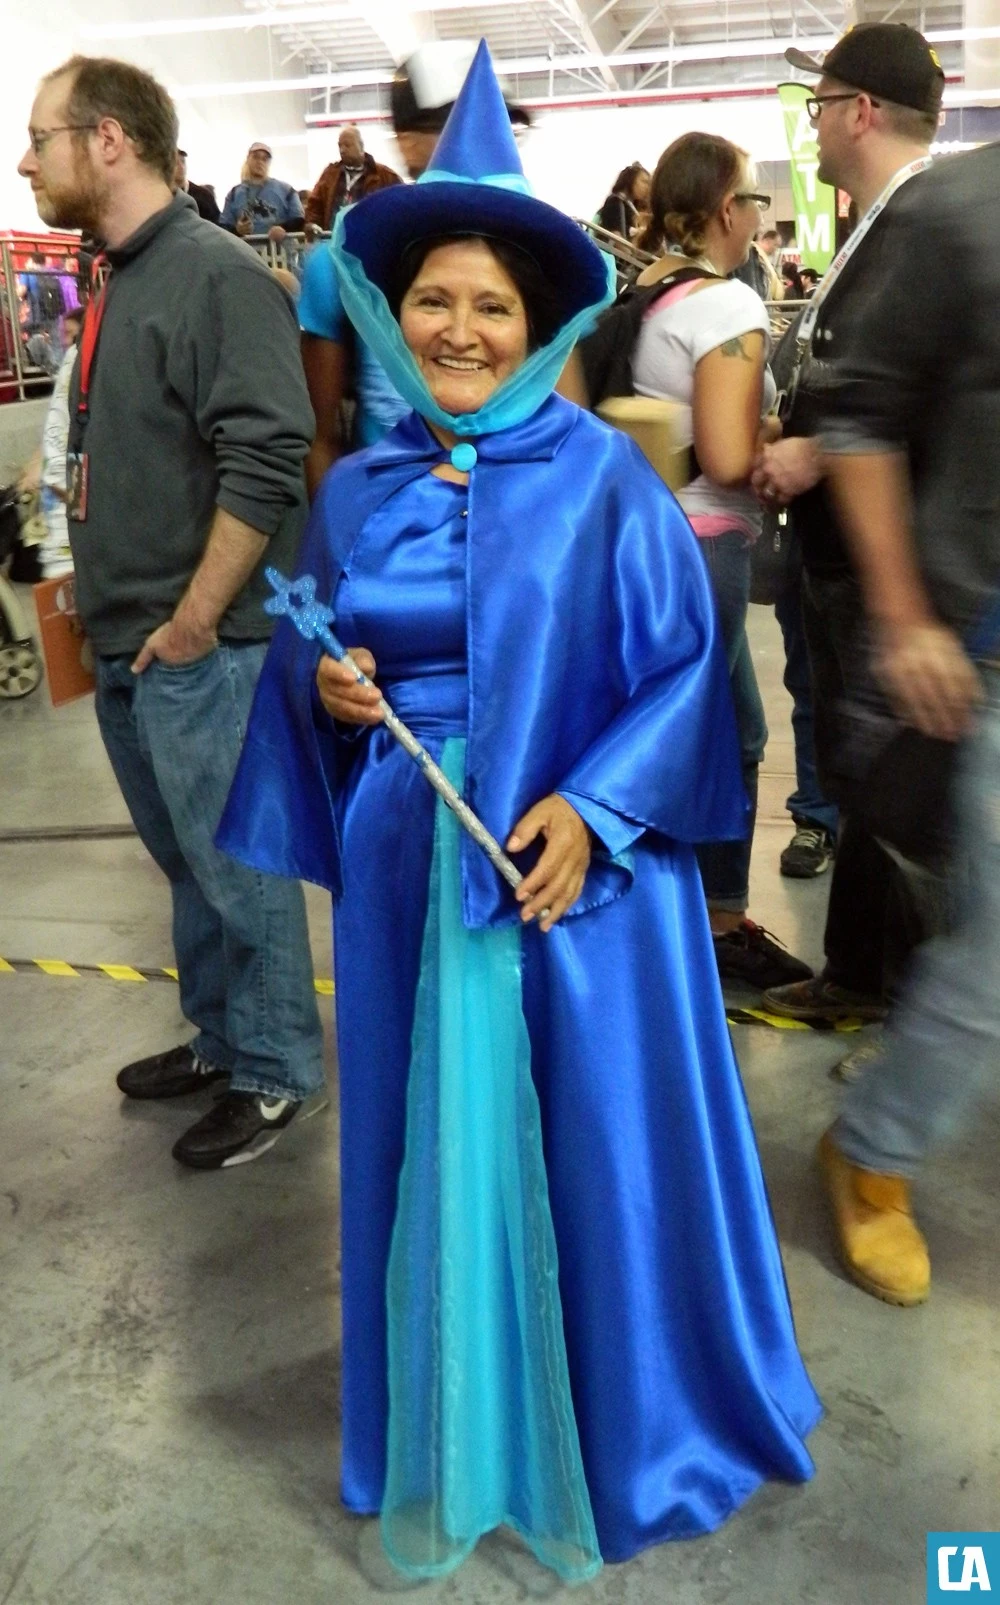 Best New York Comic-Con 2012 Cosplay Ever – Saturday [NYCC 2012]